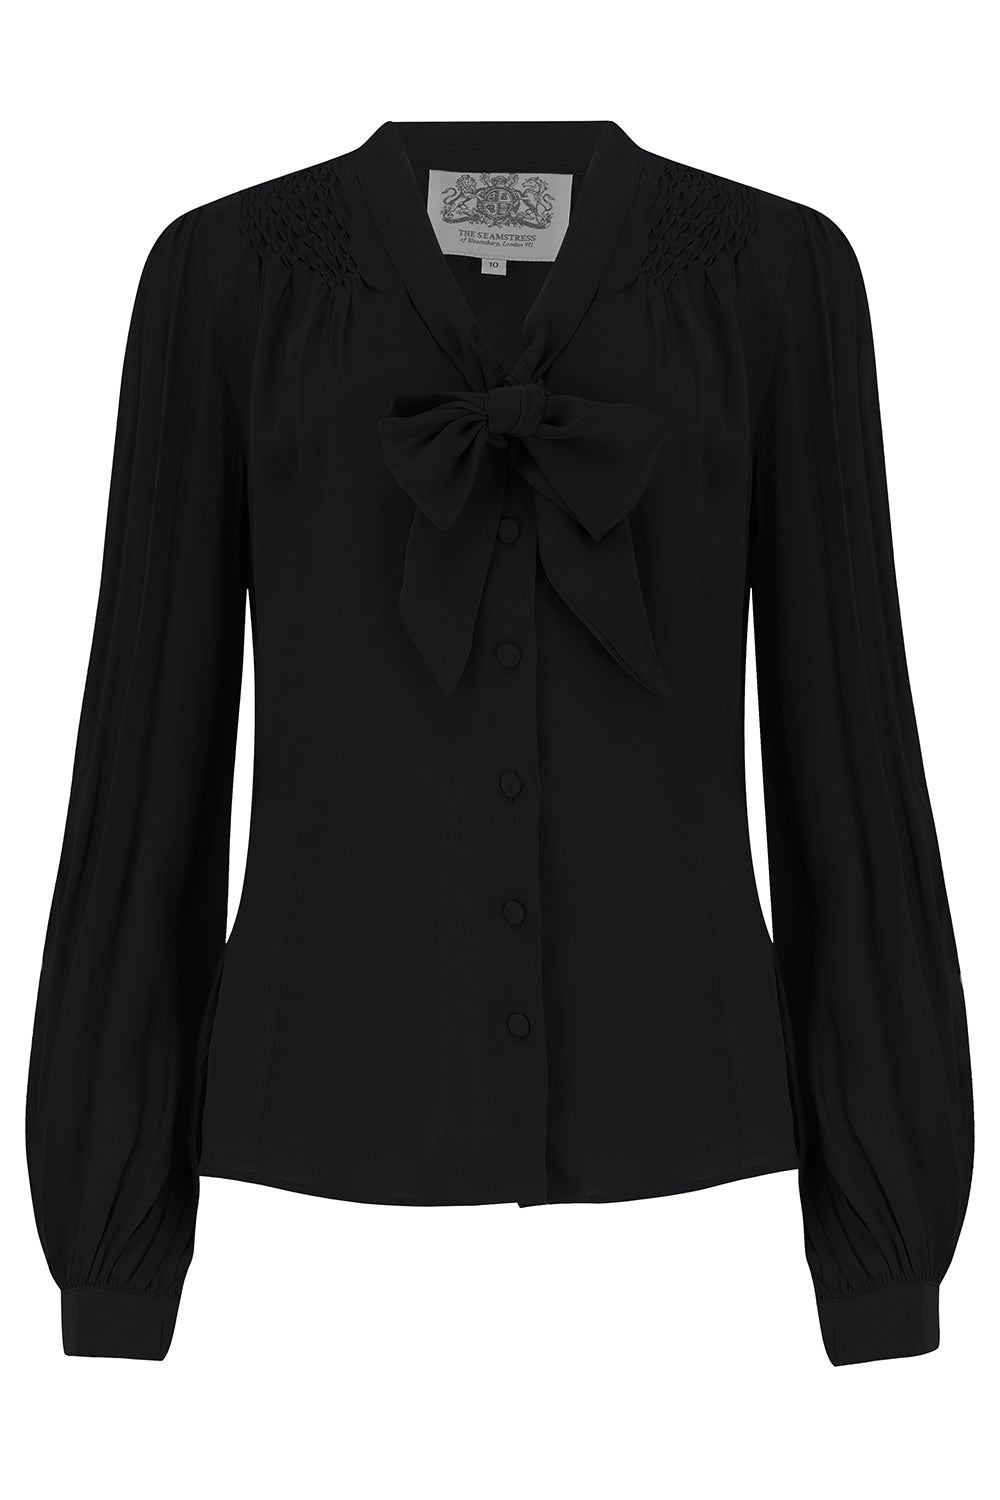 Eva Long Sleeve Blouse in Solid Black, Authentic & Classic 1940s Vintage Style